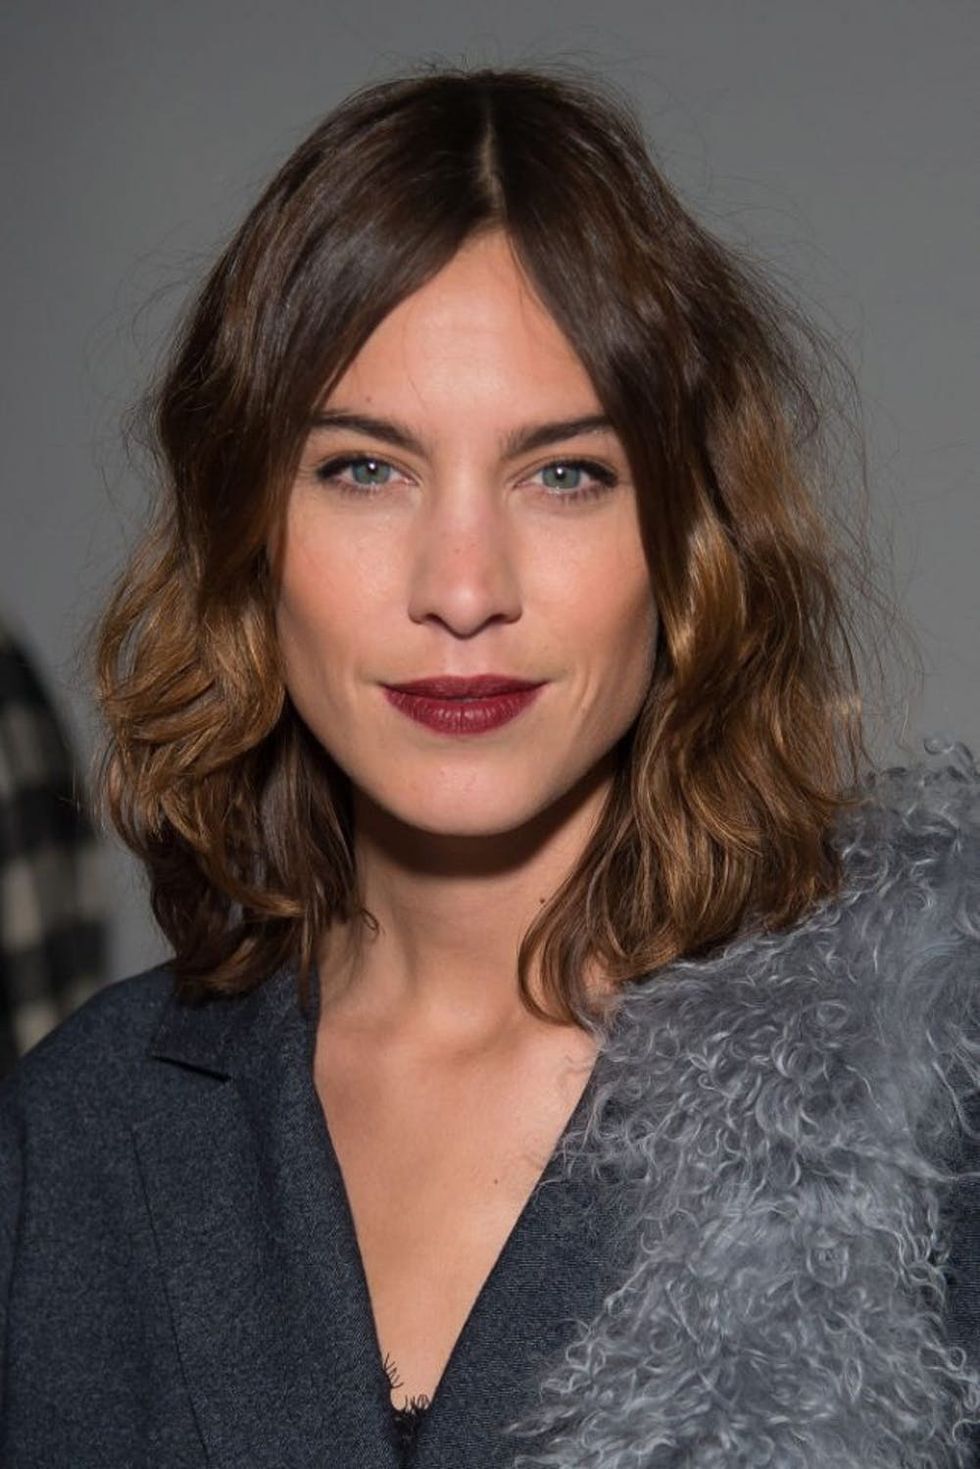 NEW YORK, NY - FEBRUARY 09: Alexa Chung attends the Noon by Noor show during February 2017 New York Fashion Week: The Shows at Gallery 3, Skylight Clarkson Sq on February 9, 2017 in New York City. (Photo by Michael Stewart/WireImage)